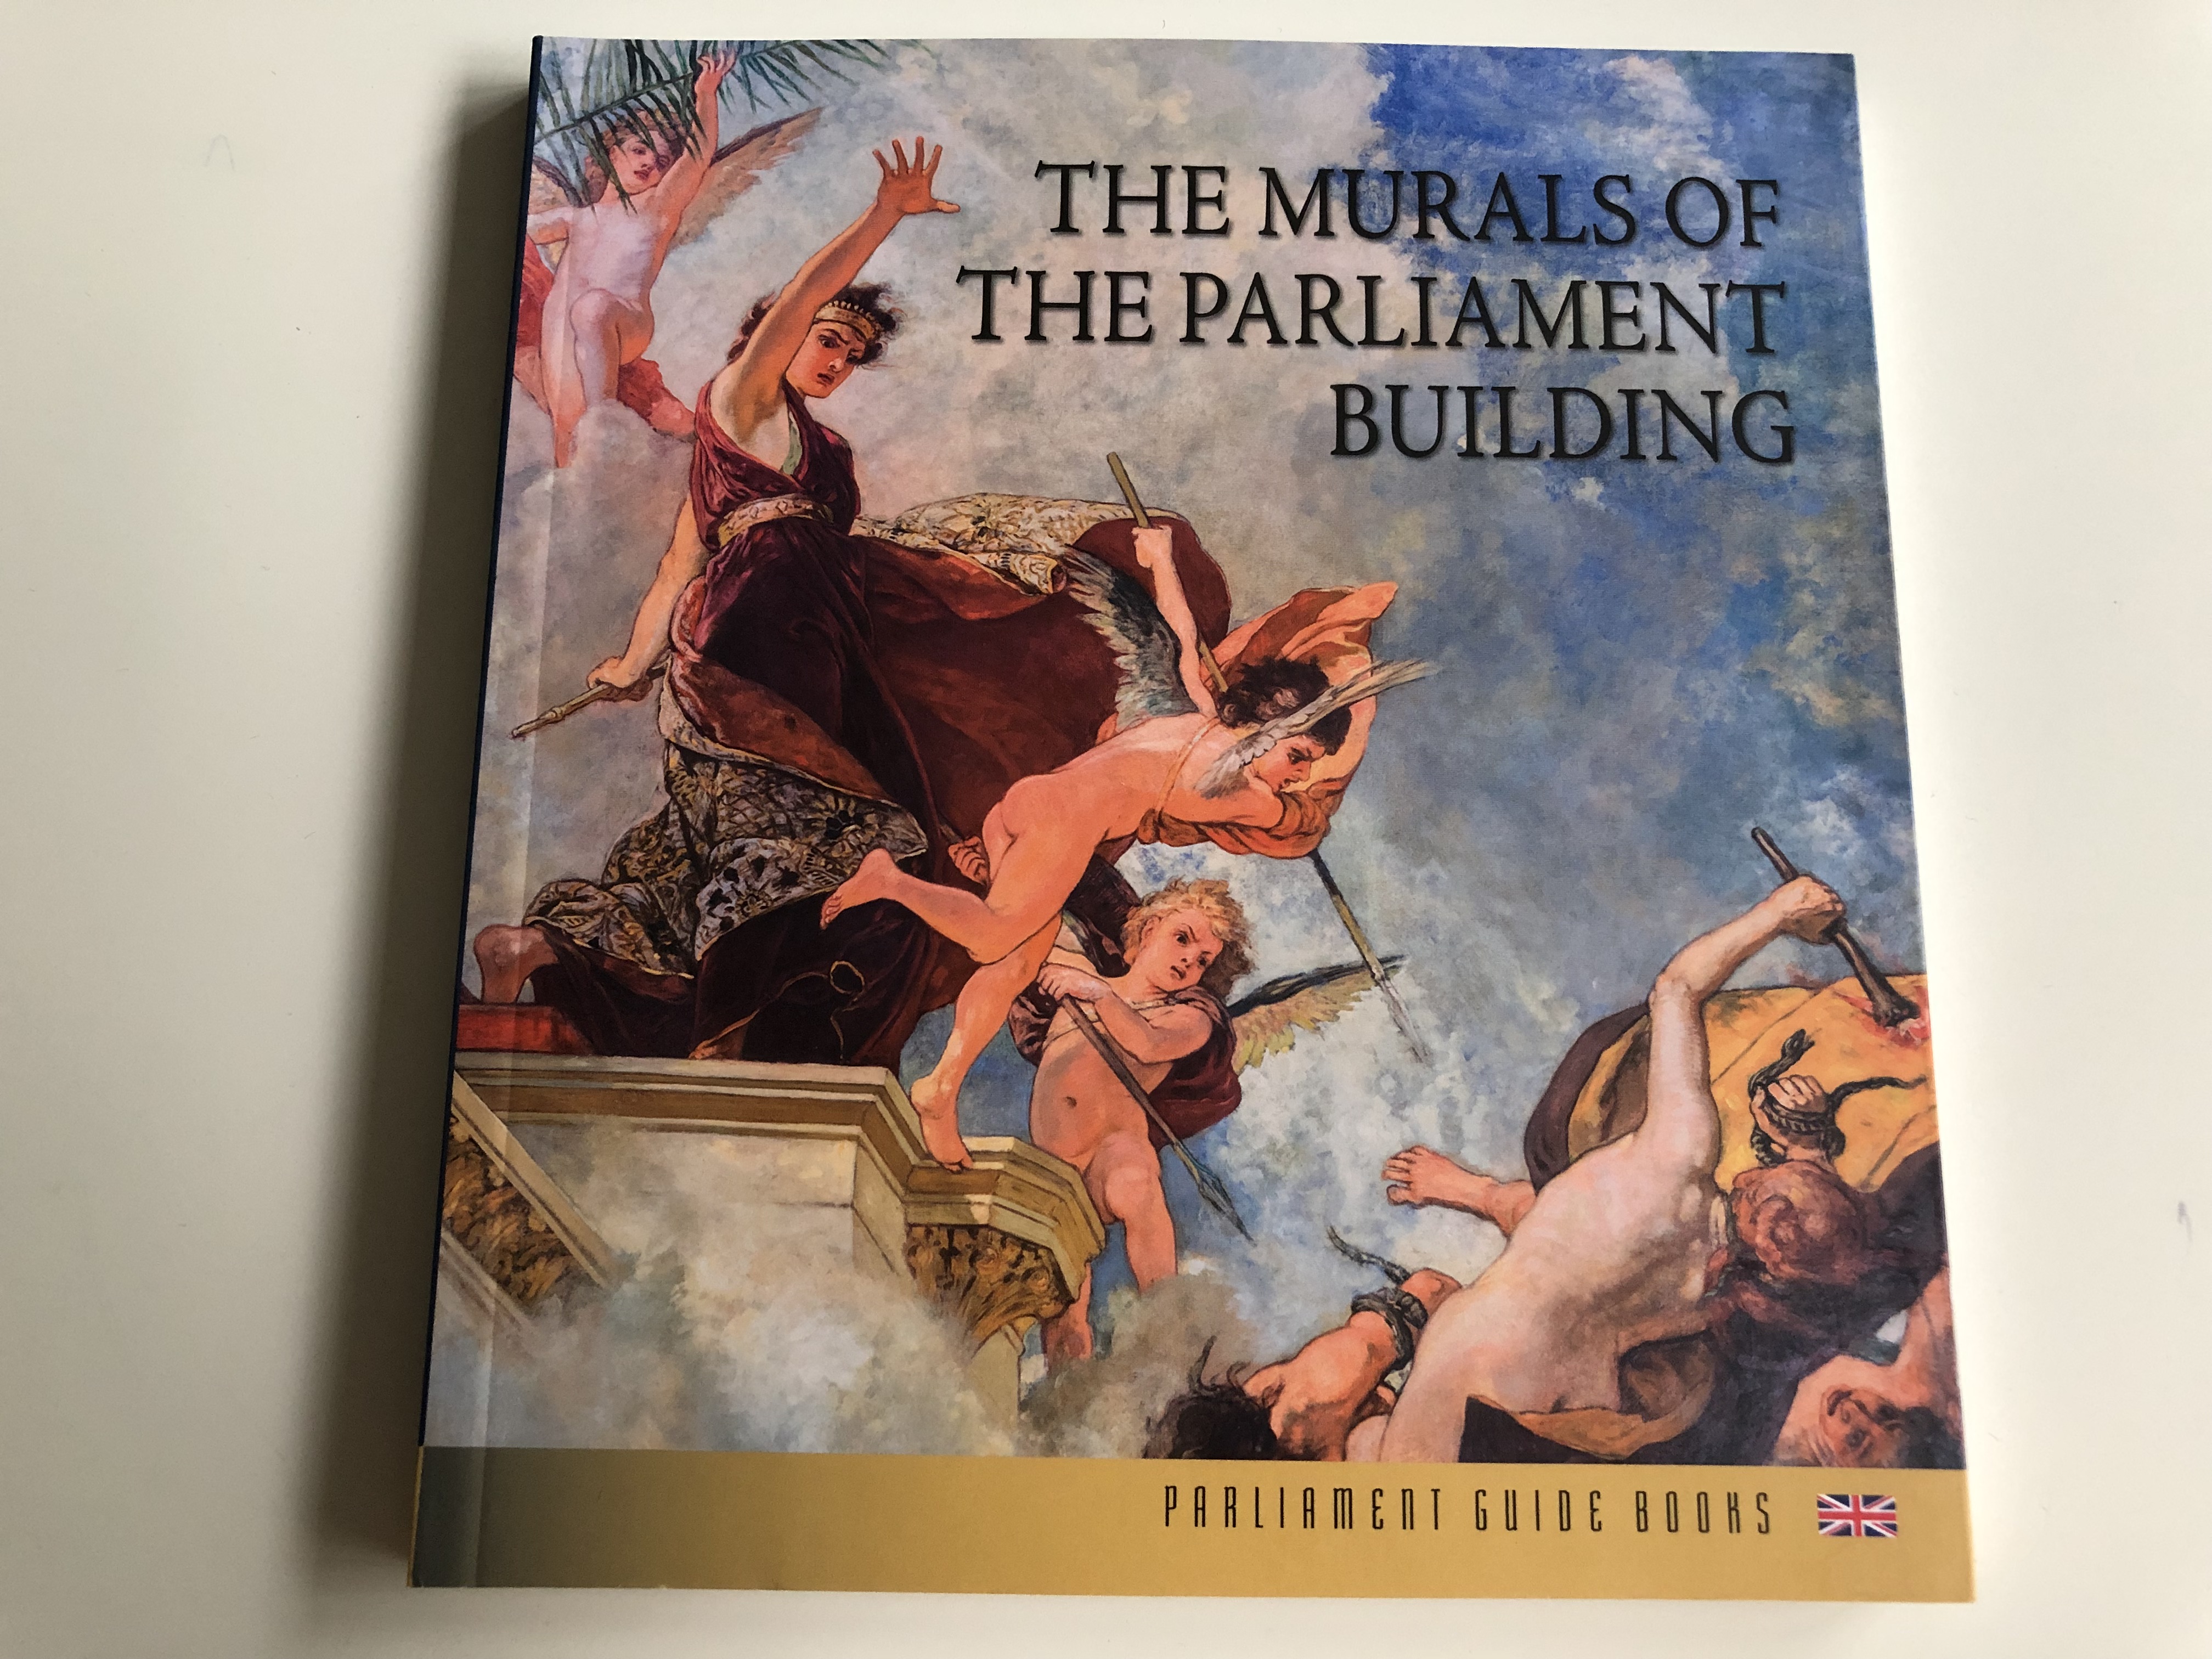 the-murals-of-the-parliament-building-parliament-guide-books-orsz-gh-z-k-nyvkiad-2017-1-.jpg